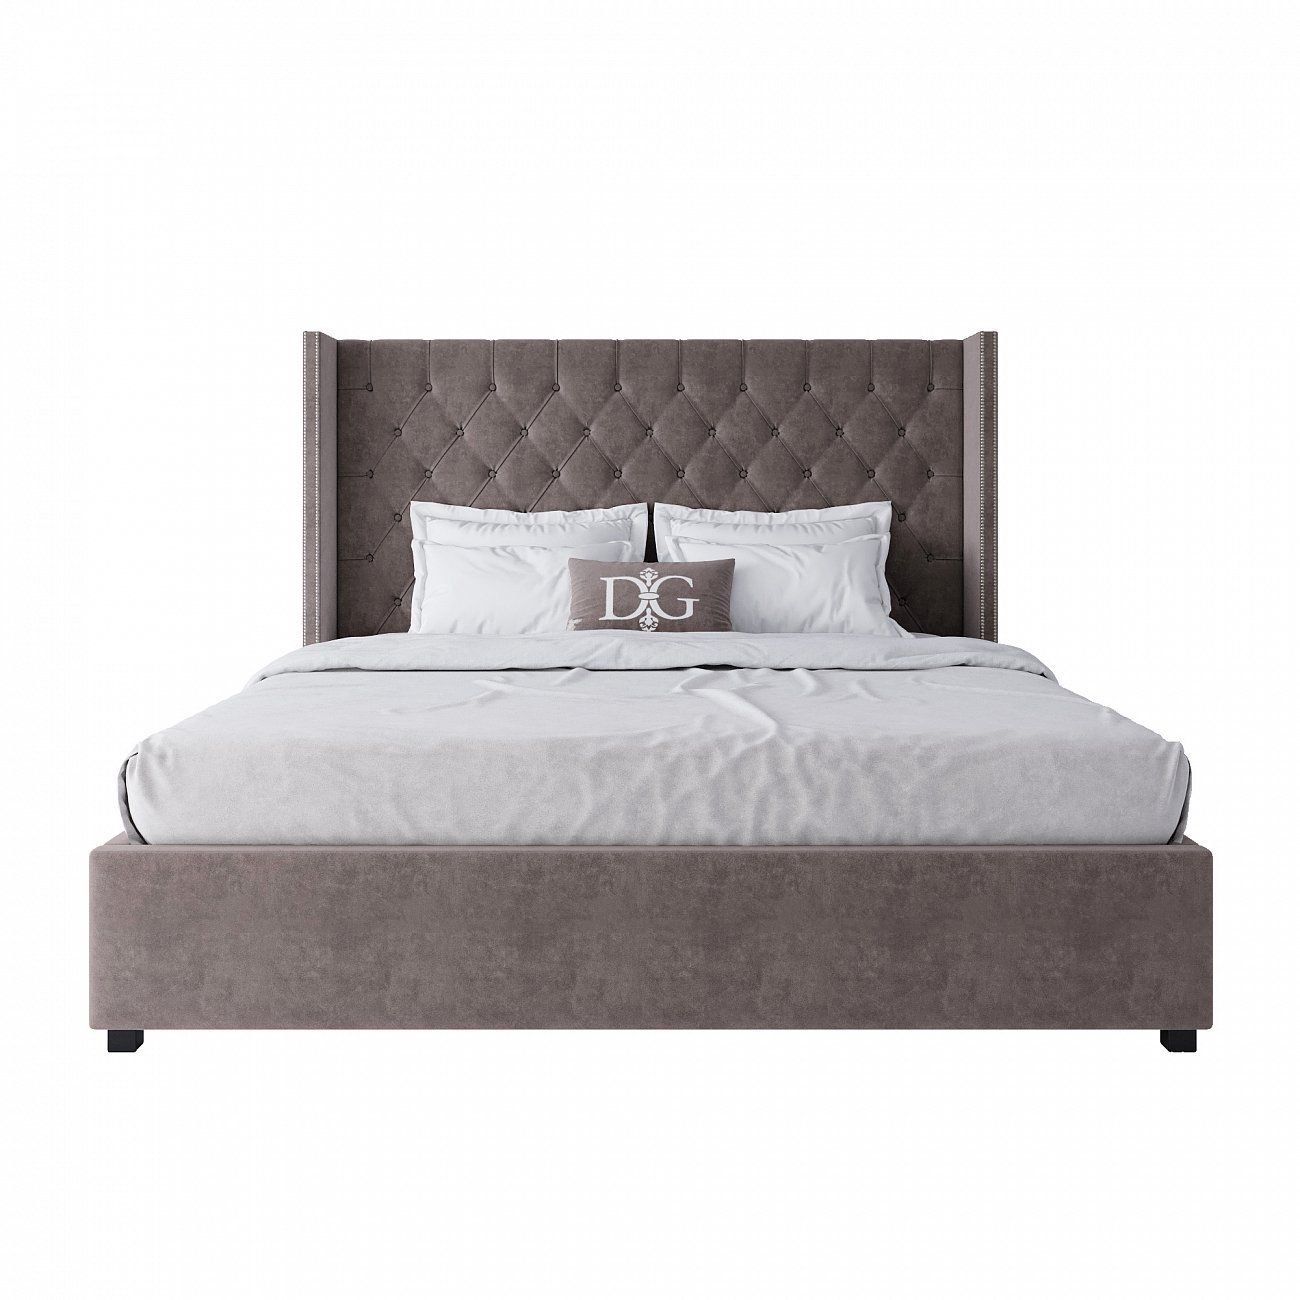 Double bed with upholstered headboard 180x200 cm grey-brown Wing